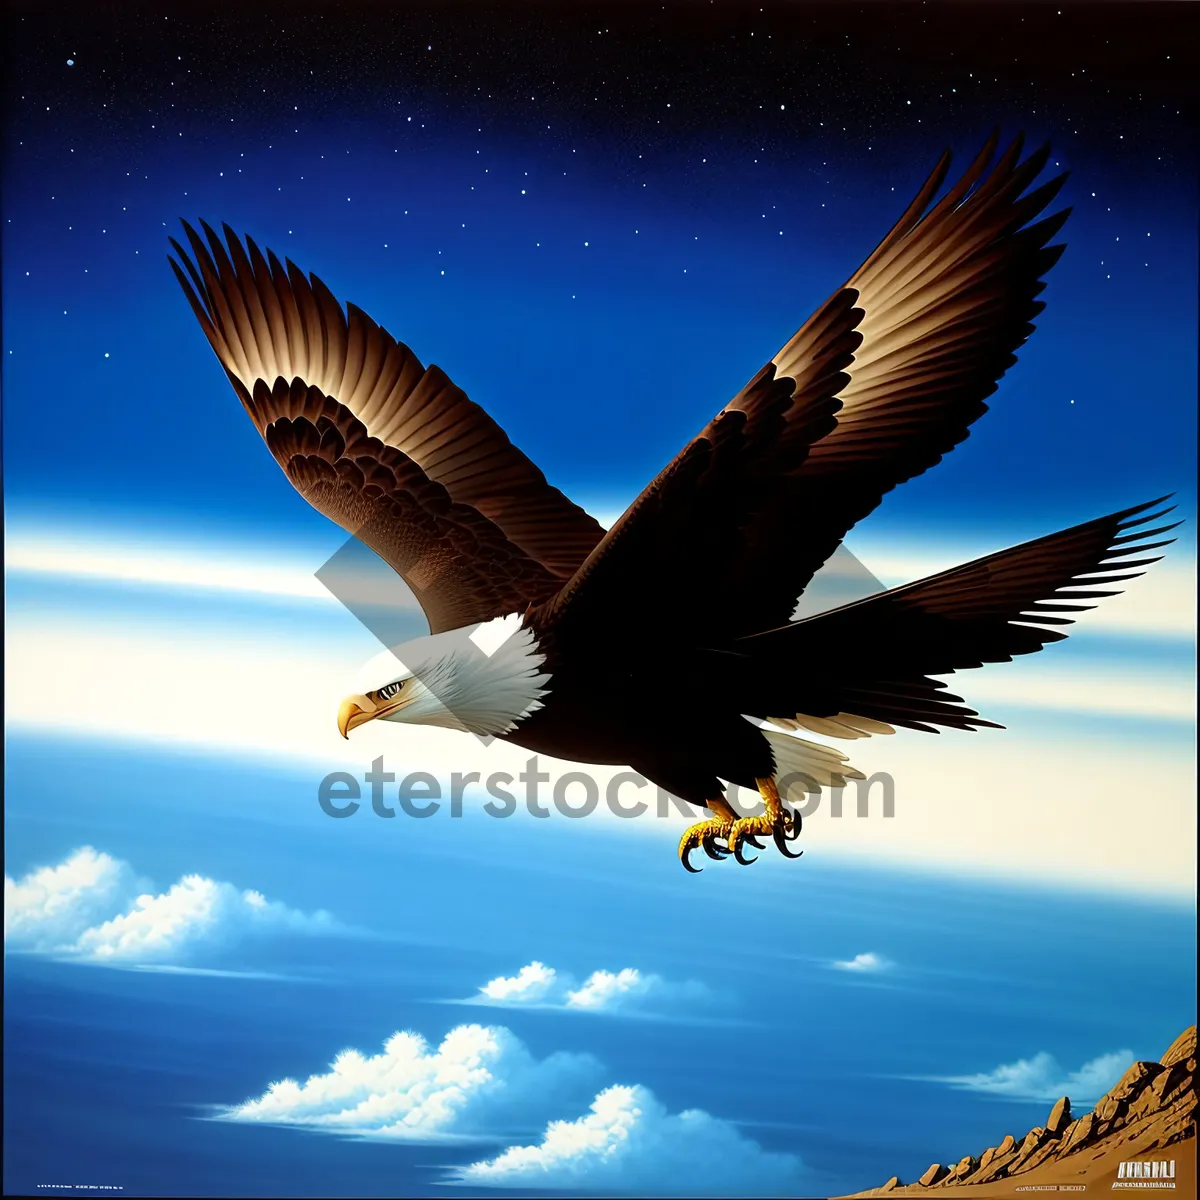 Picture of Graceful Wings Soaring in the Sky: Majestic Bald Eagle in Flight